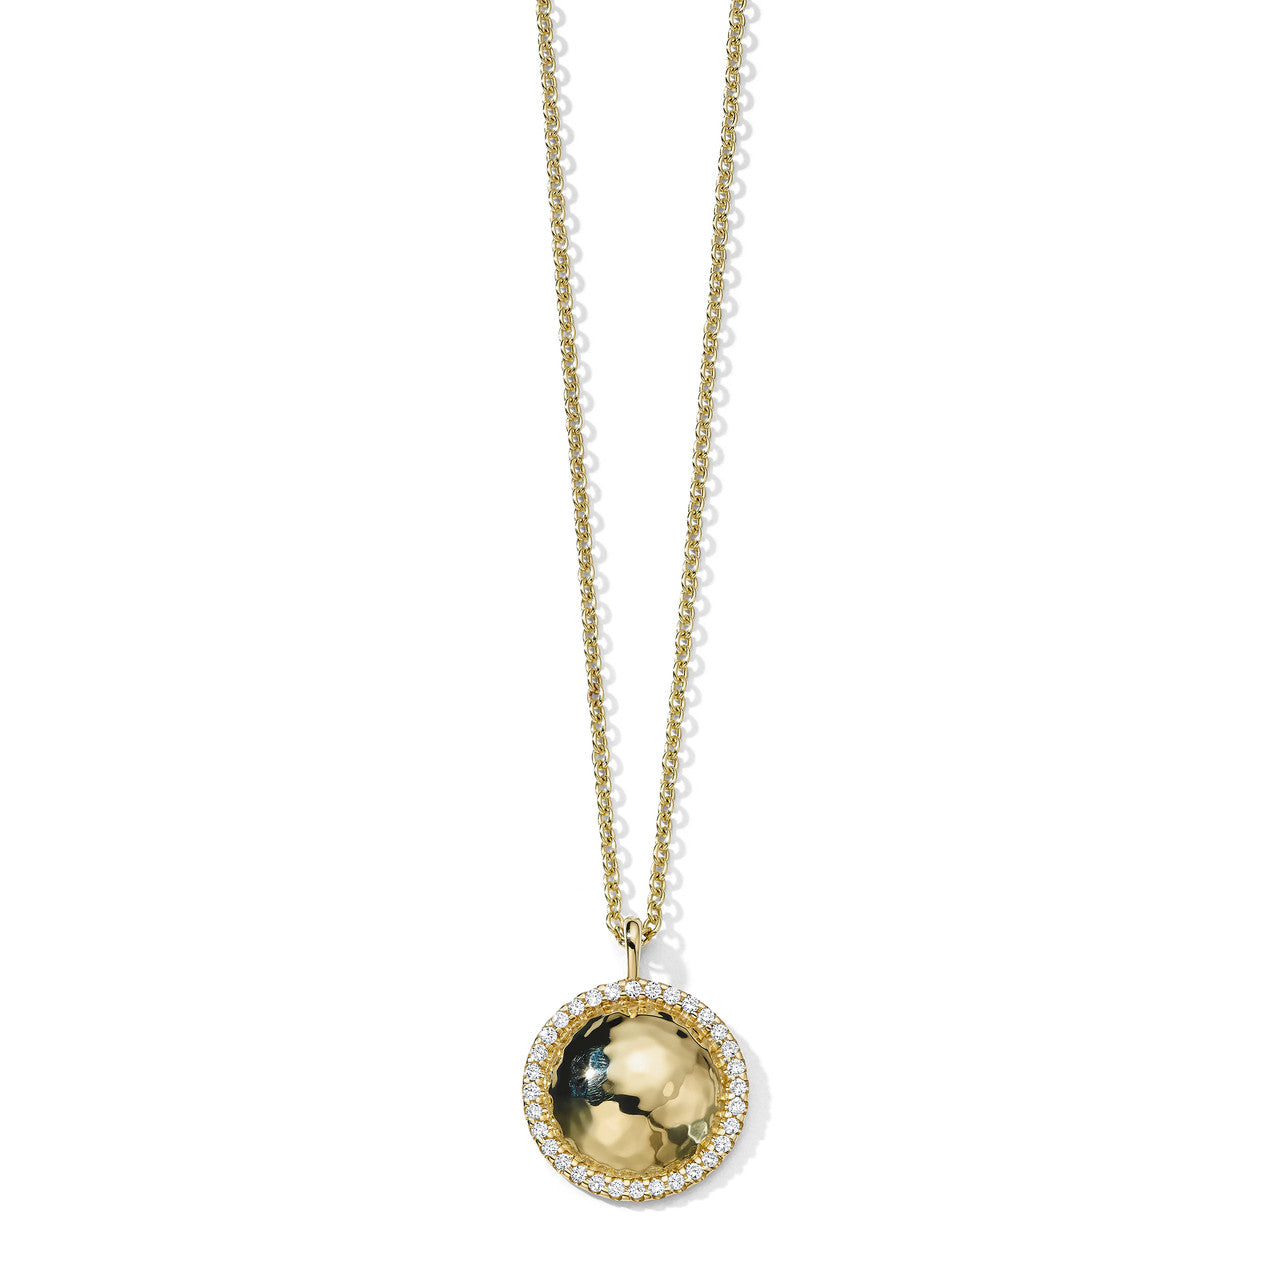 Stardust Goddess Small Hammered Dome Necklace with Diamonds